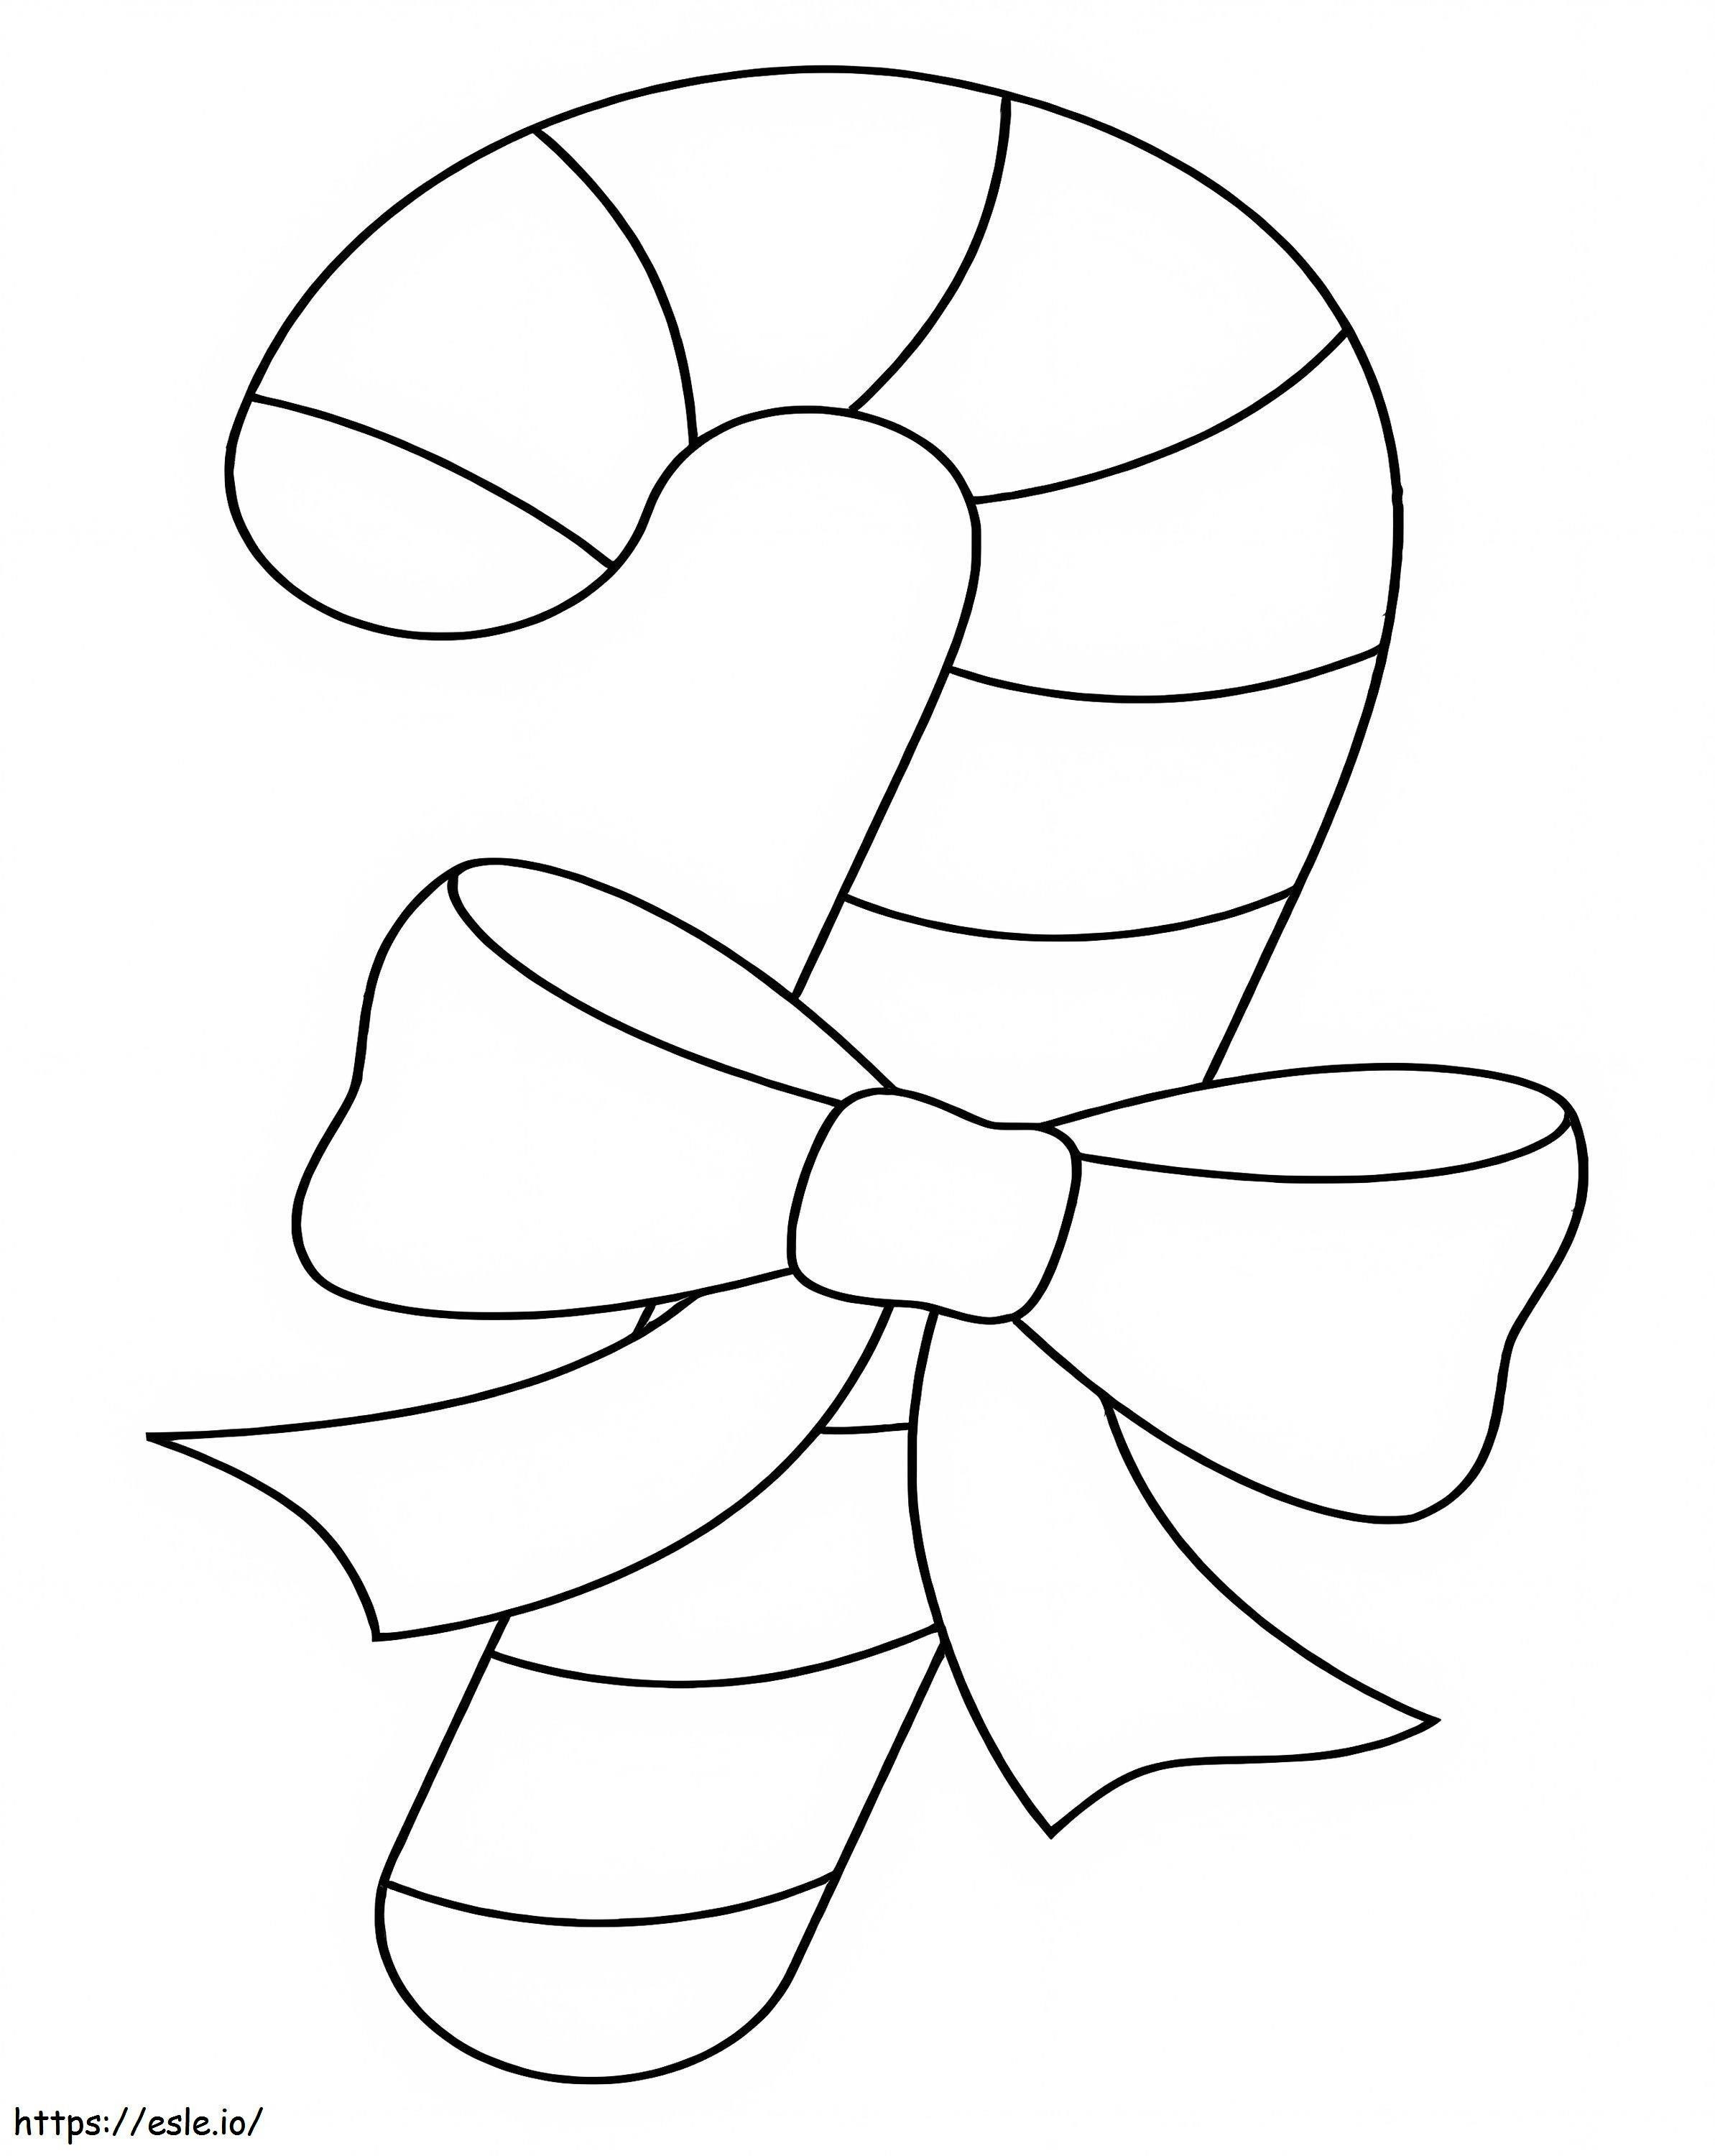 Simple Candy Cane With Bow coloring page